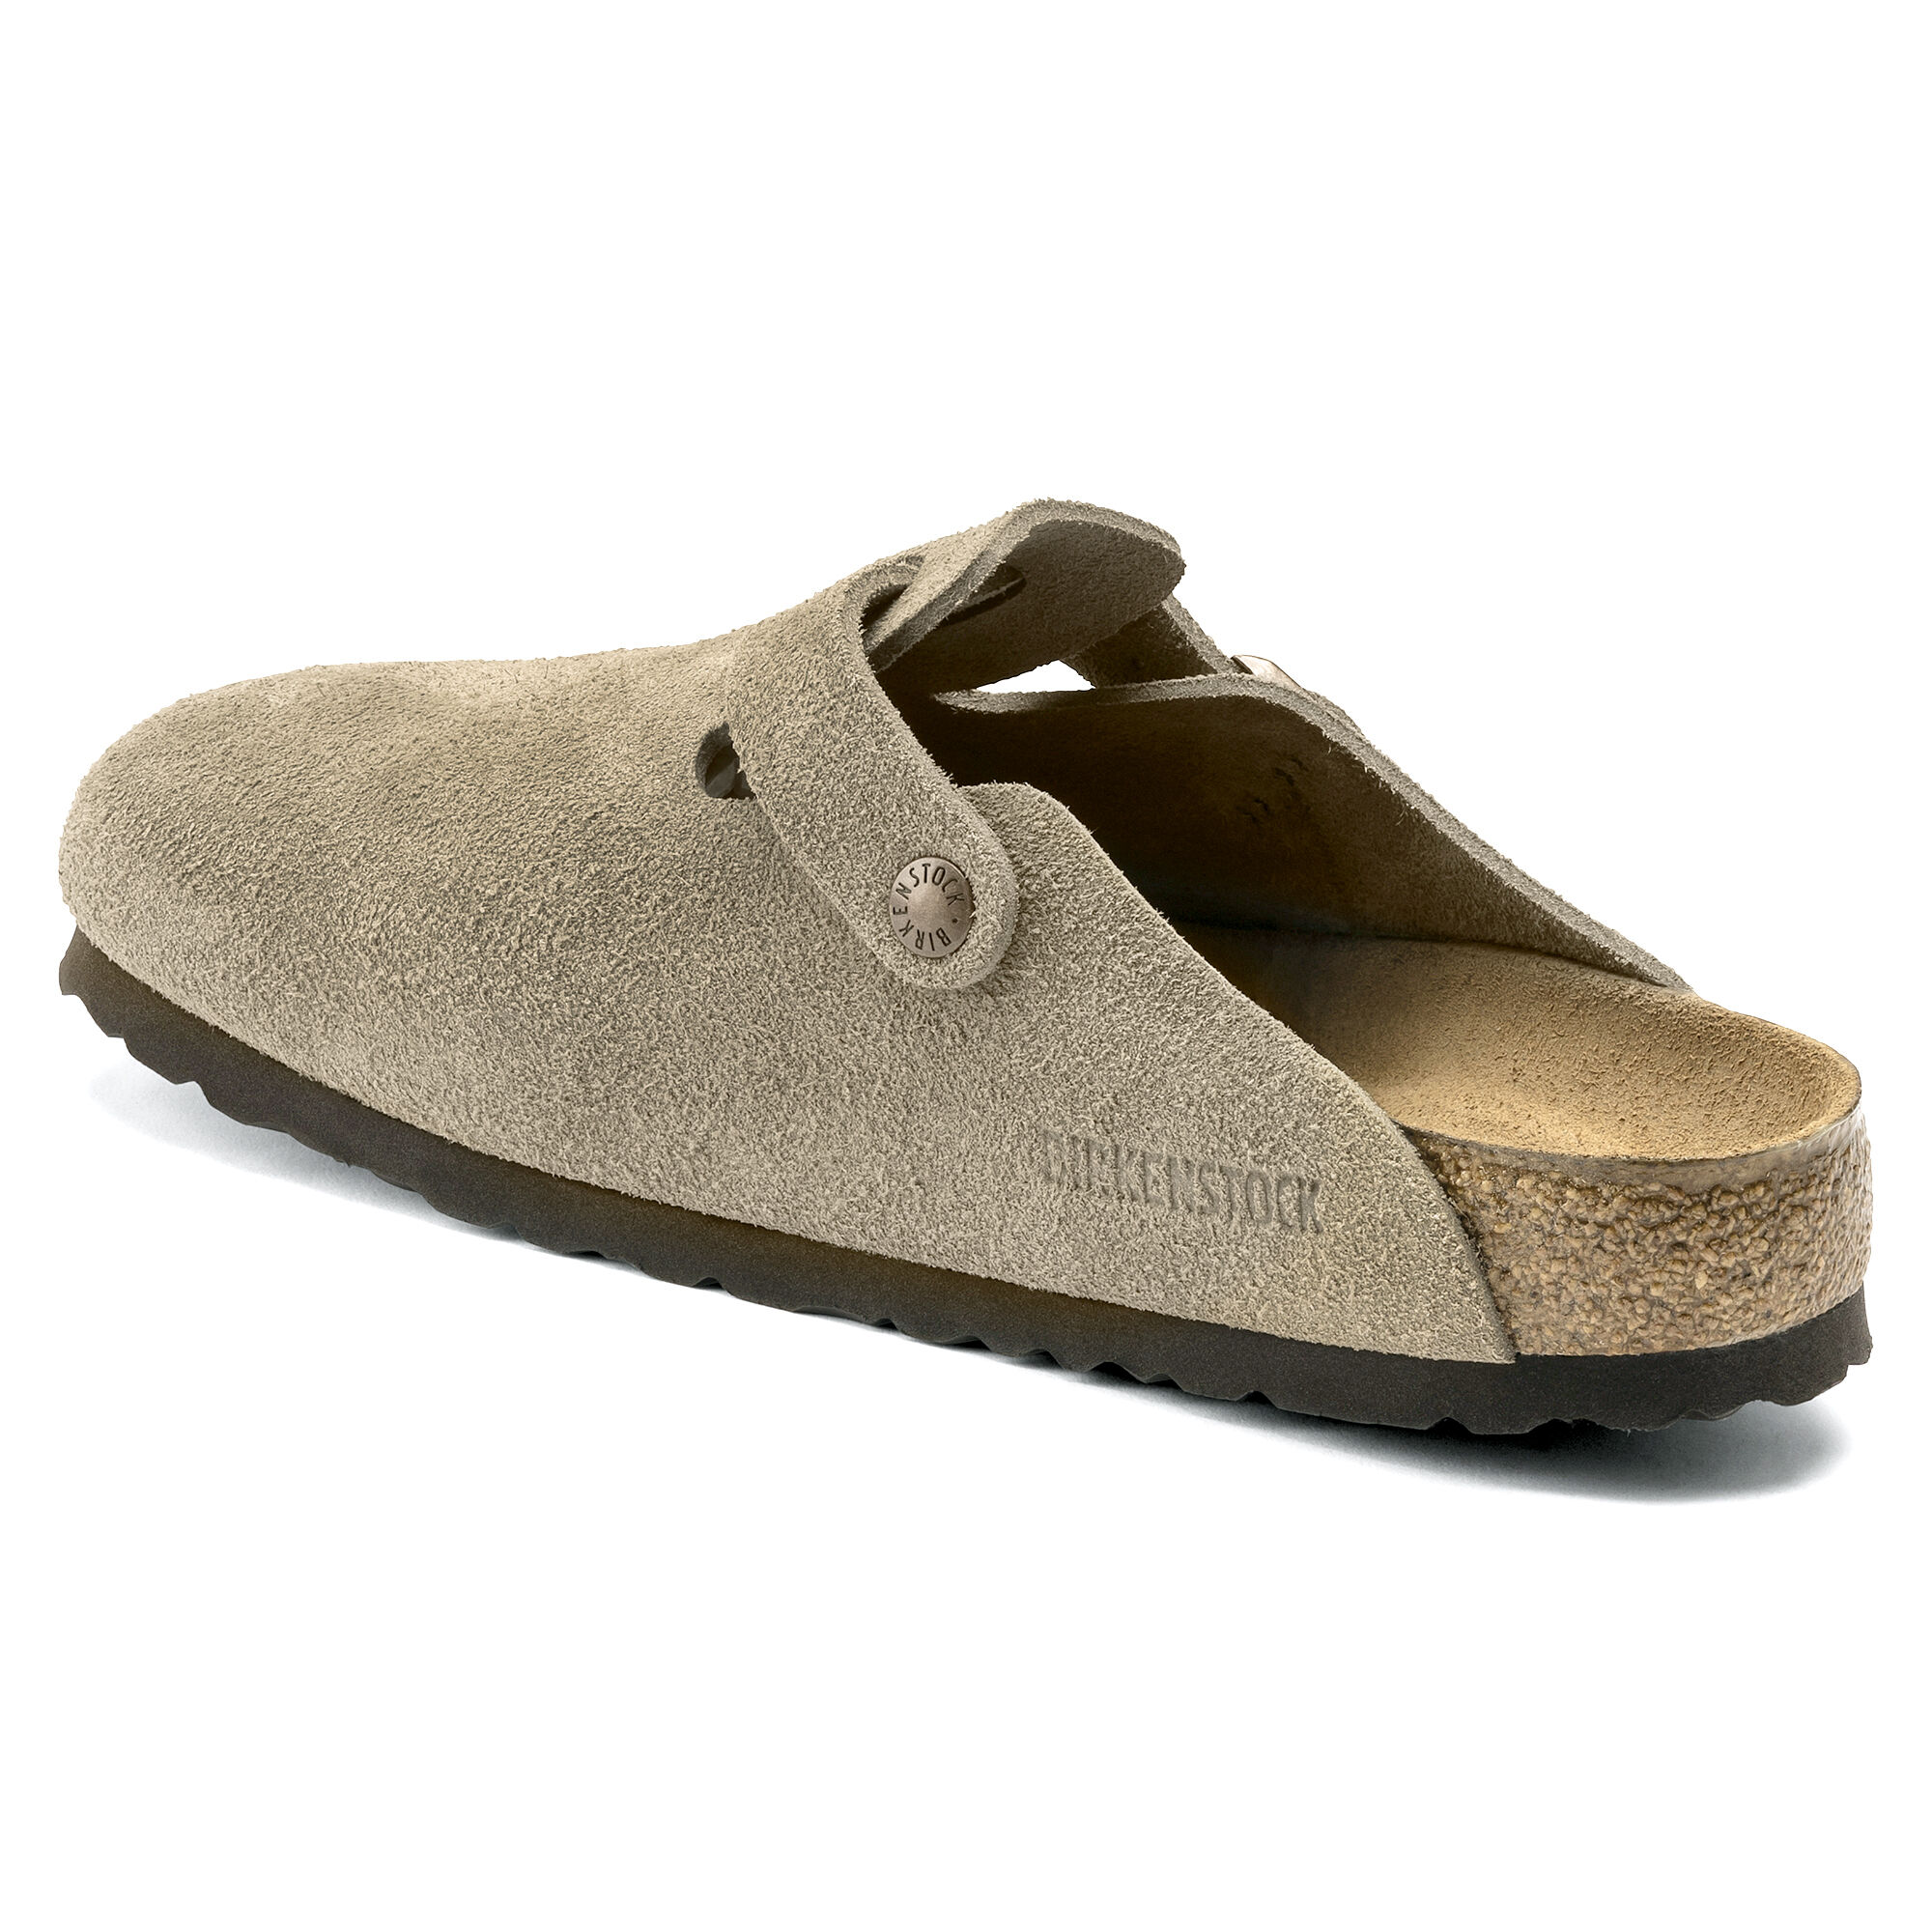 Boston Soft Footbed Suede Leather Taupe | BIRKENSTOCK